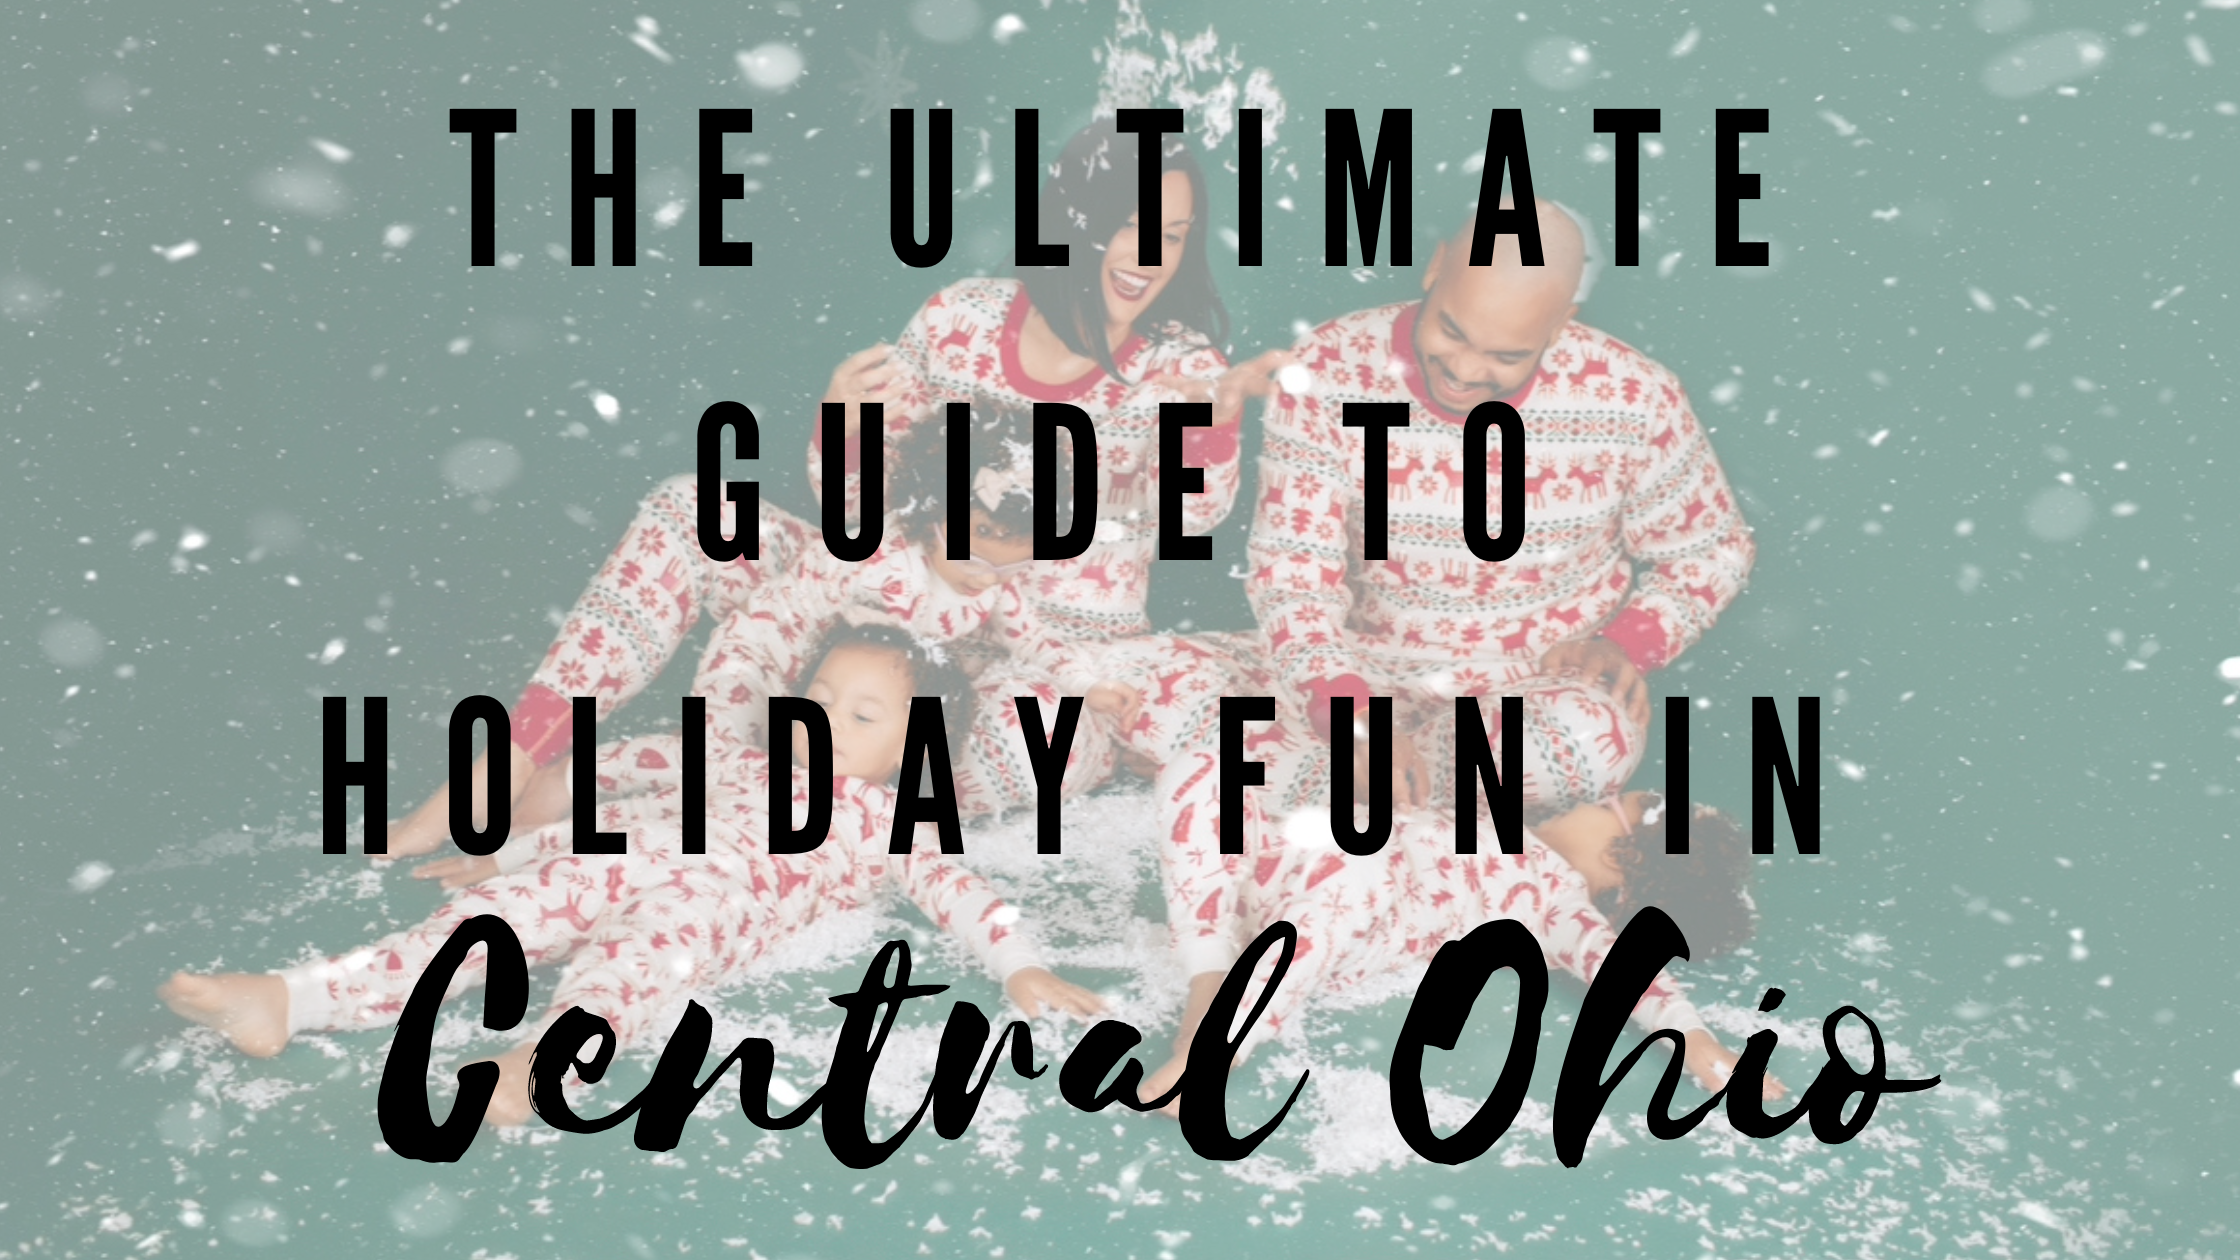 The Ultimate Guide to Holiday Fun in Central Ohio 